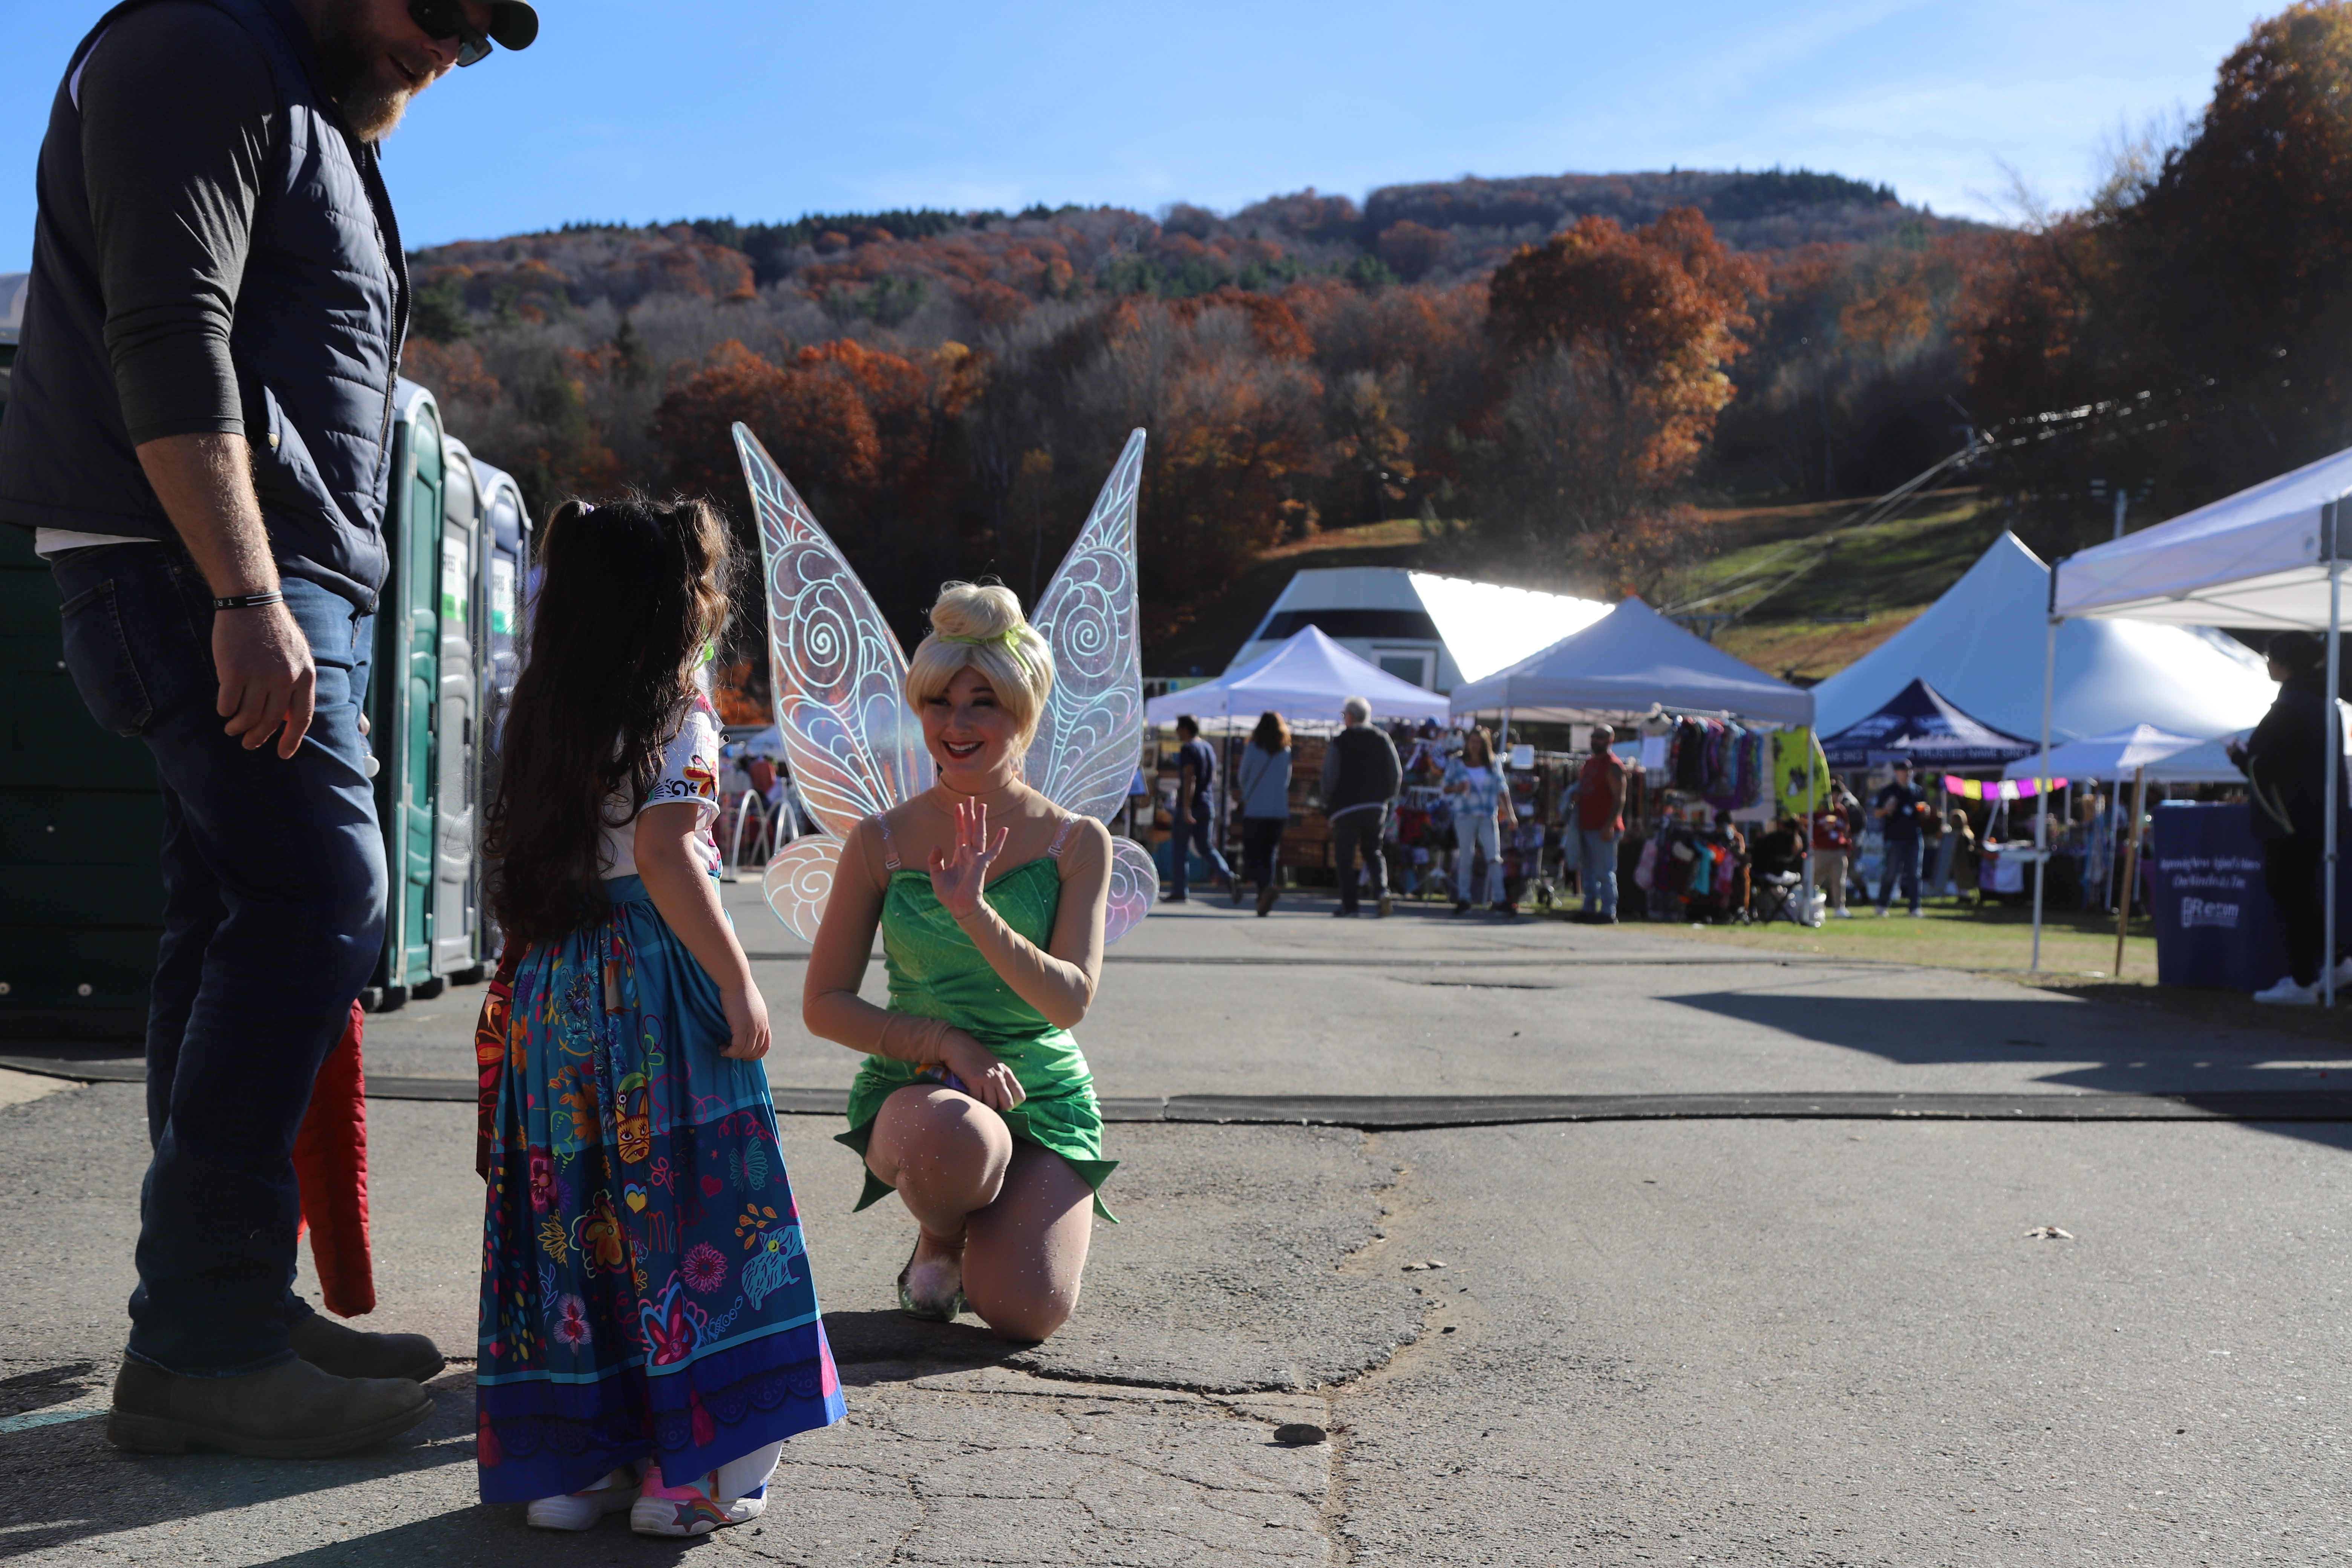 A woman dressed as Tinkerbell kneels to greet a little girl on the front road of an outdoor festival